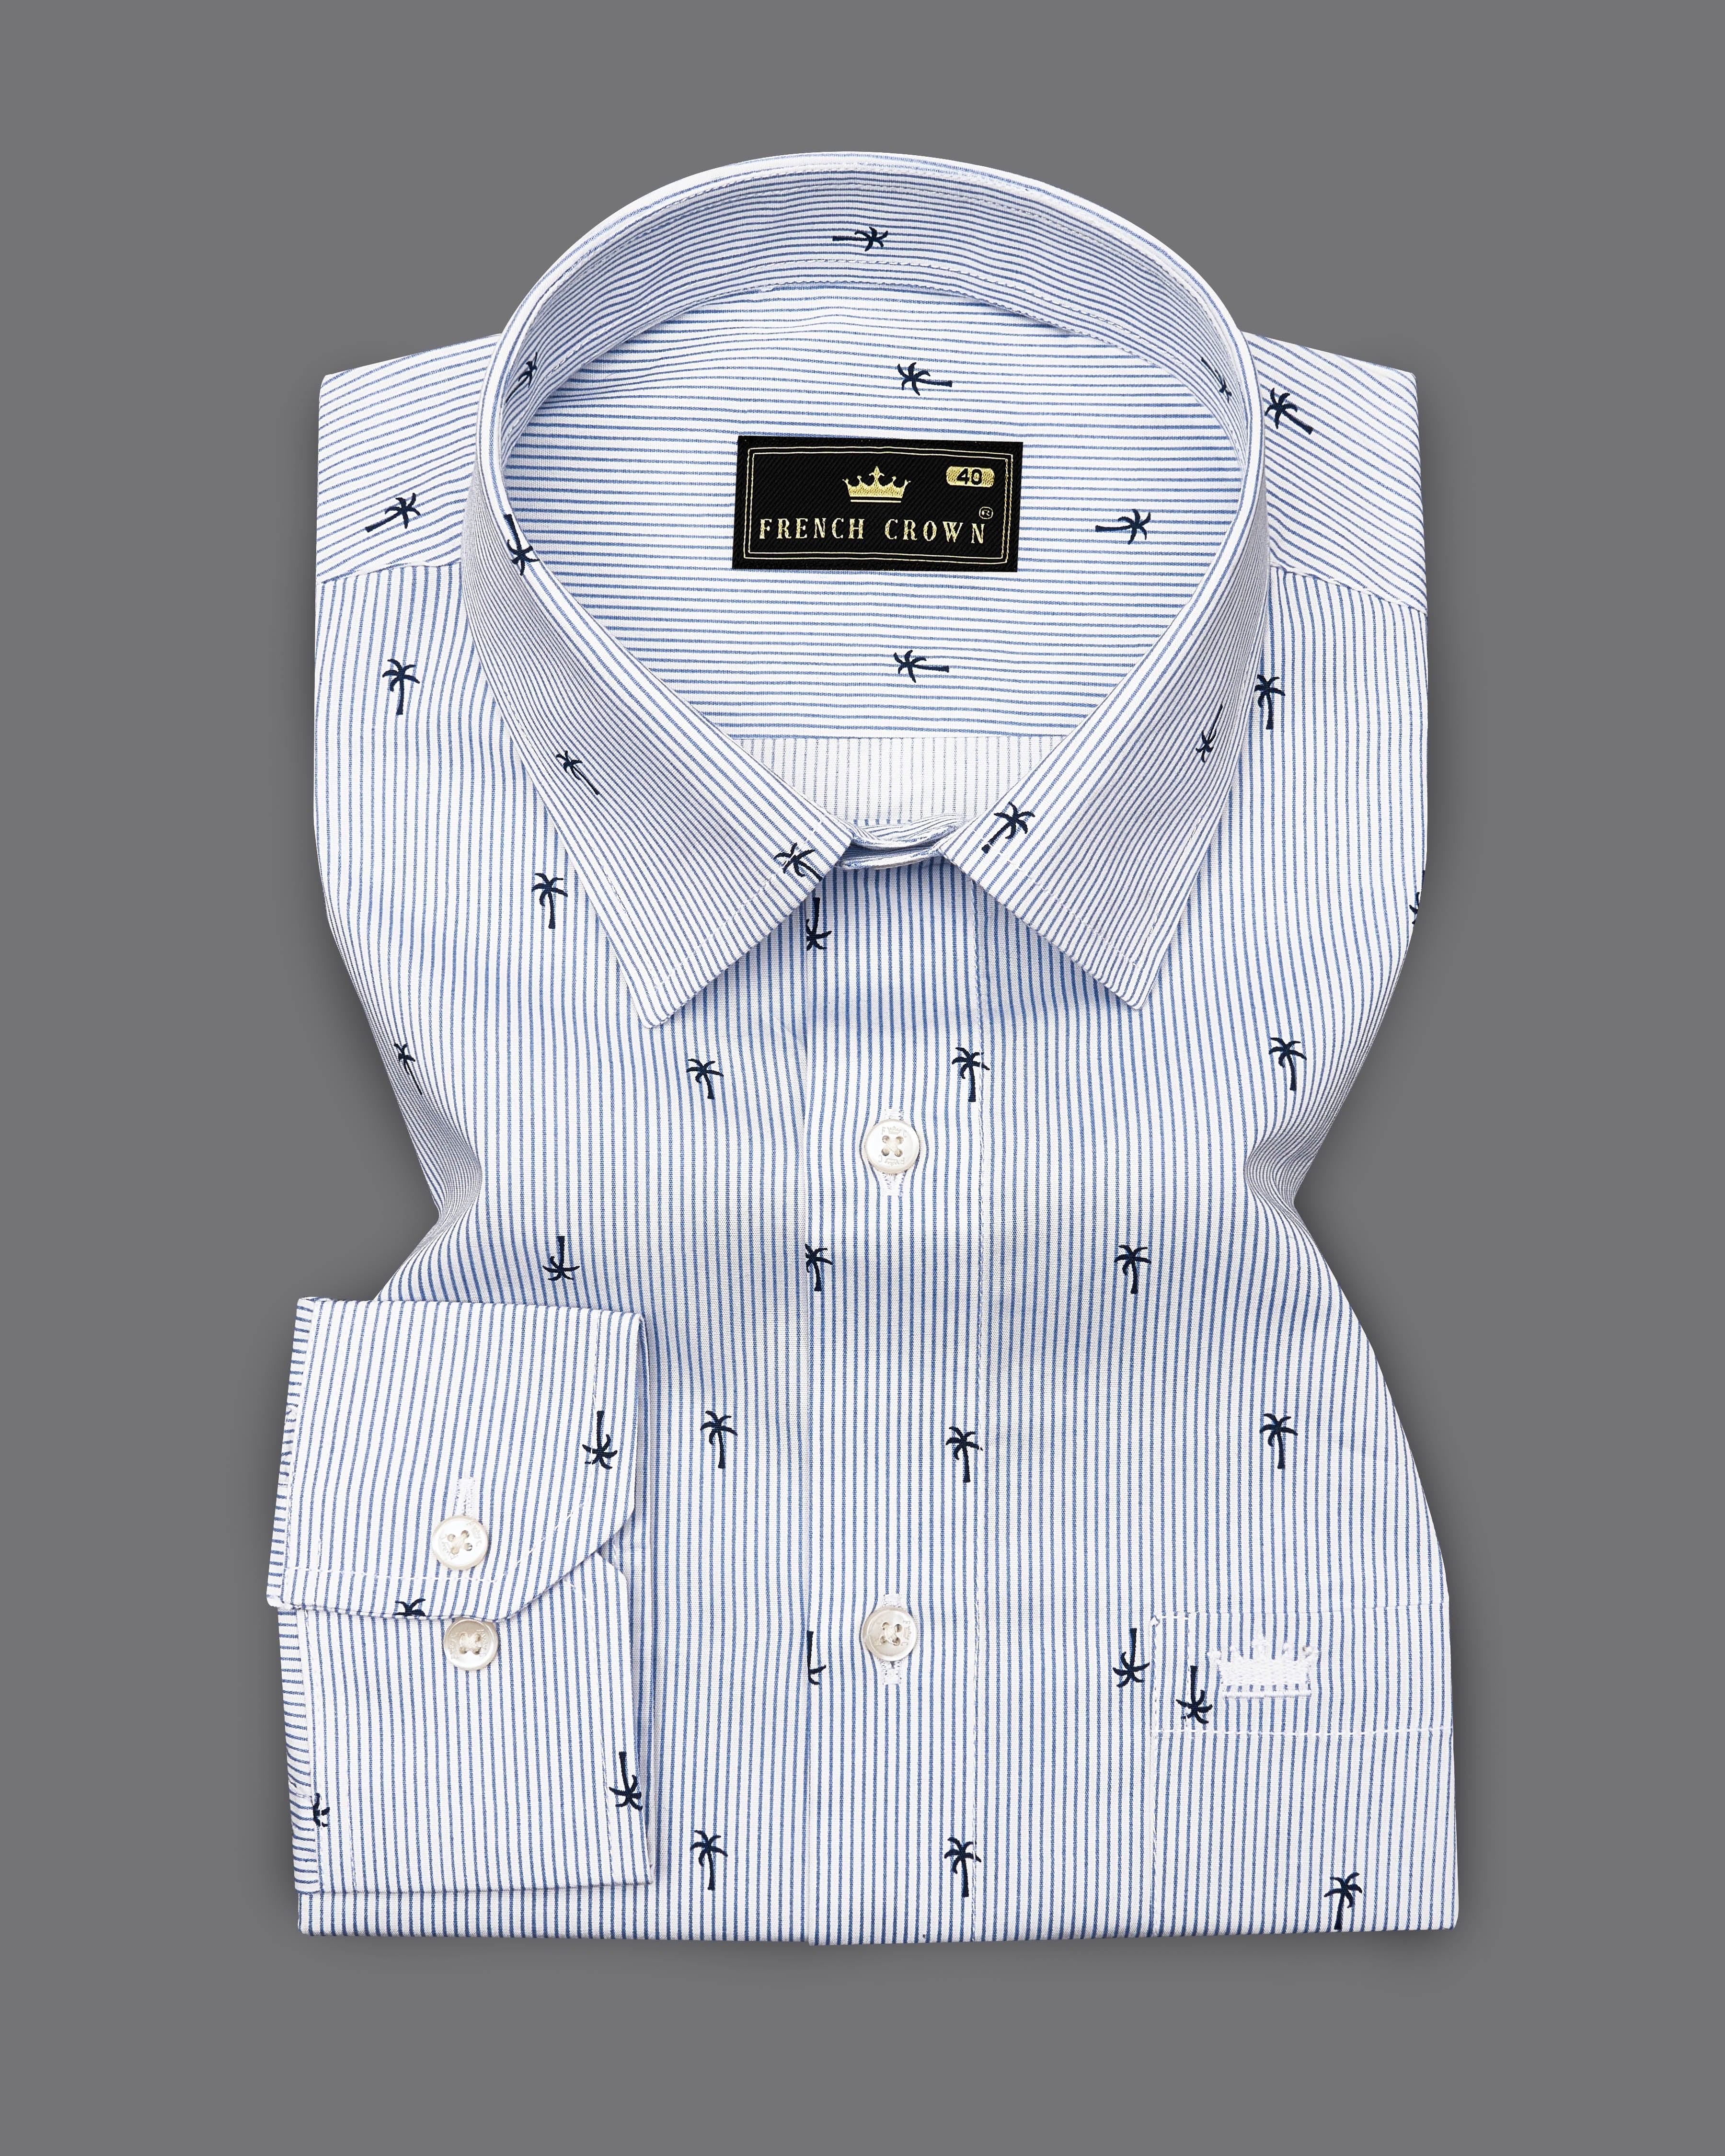 Pastel Blue with White Striped and Printed Premium Cotton Shirt 9063-38, 9063-H-38, 9063-39, 9063-H-39, 9063-40, 9063-H-40, 9063-42, 9063-H-42, 9063-44, 9063-H-44, 9063-46, 9063-H-46, 9063-48, 9063-H-48, 9063-50, 9063-H-50, 9063-52, 9063-H-52